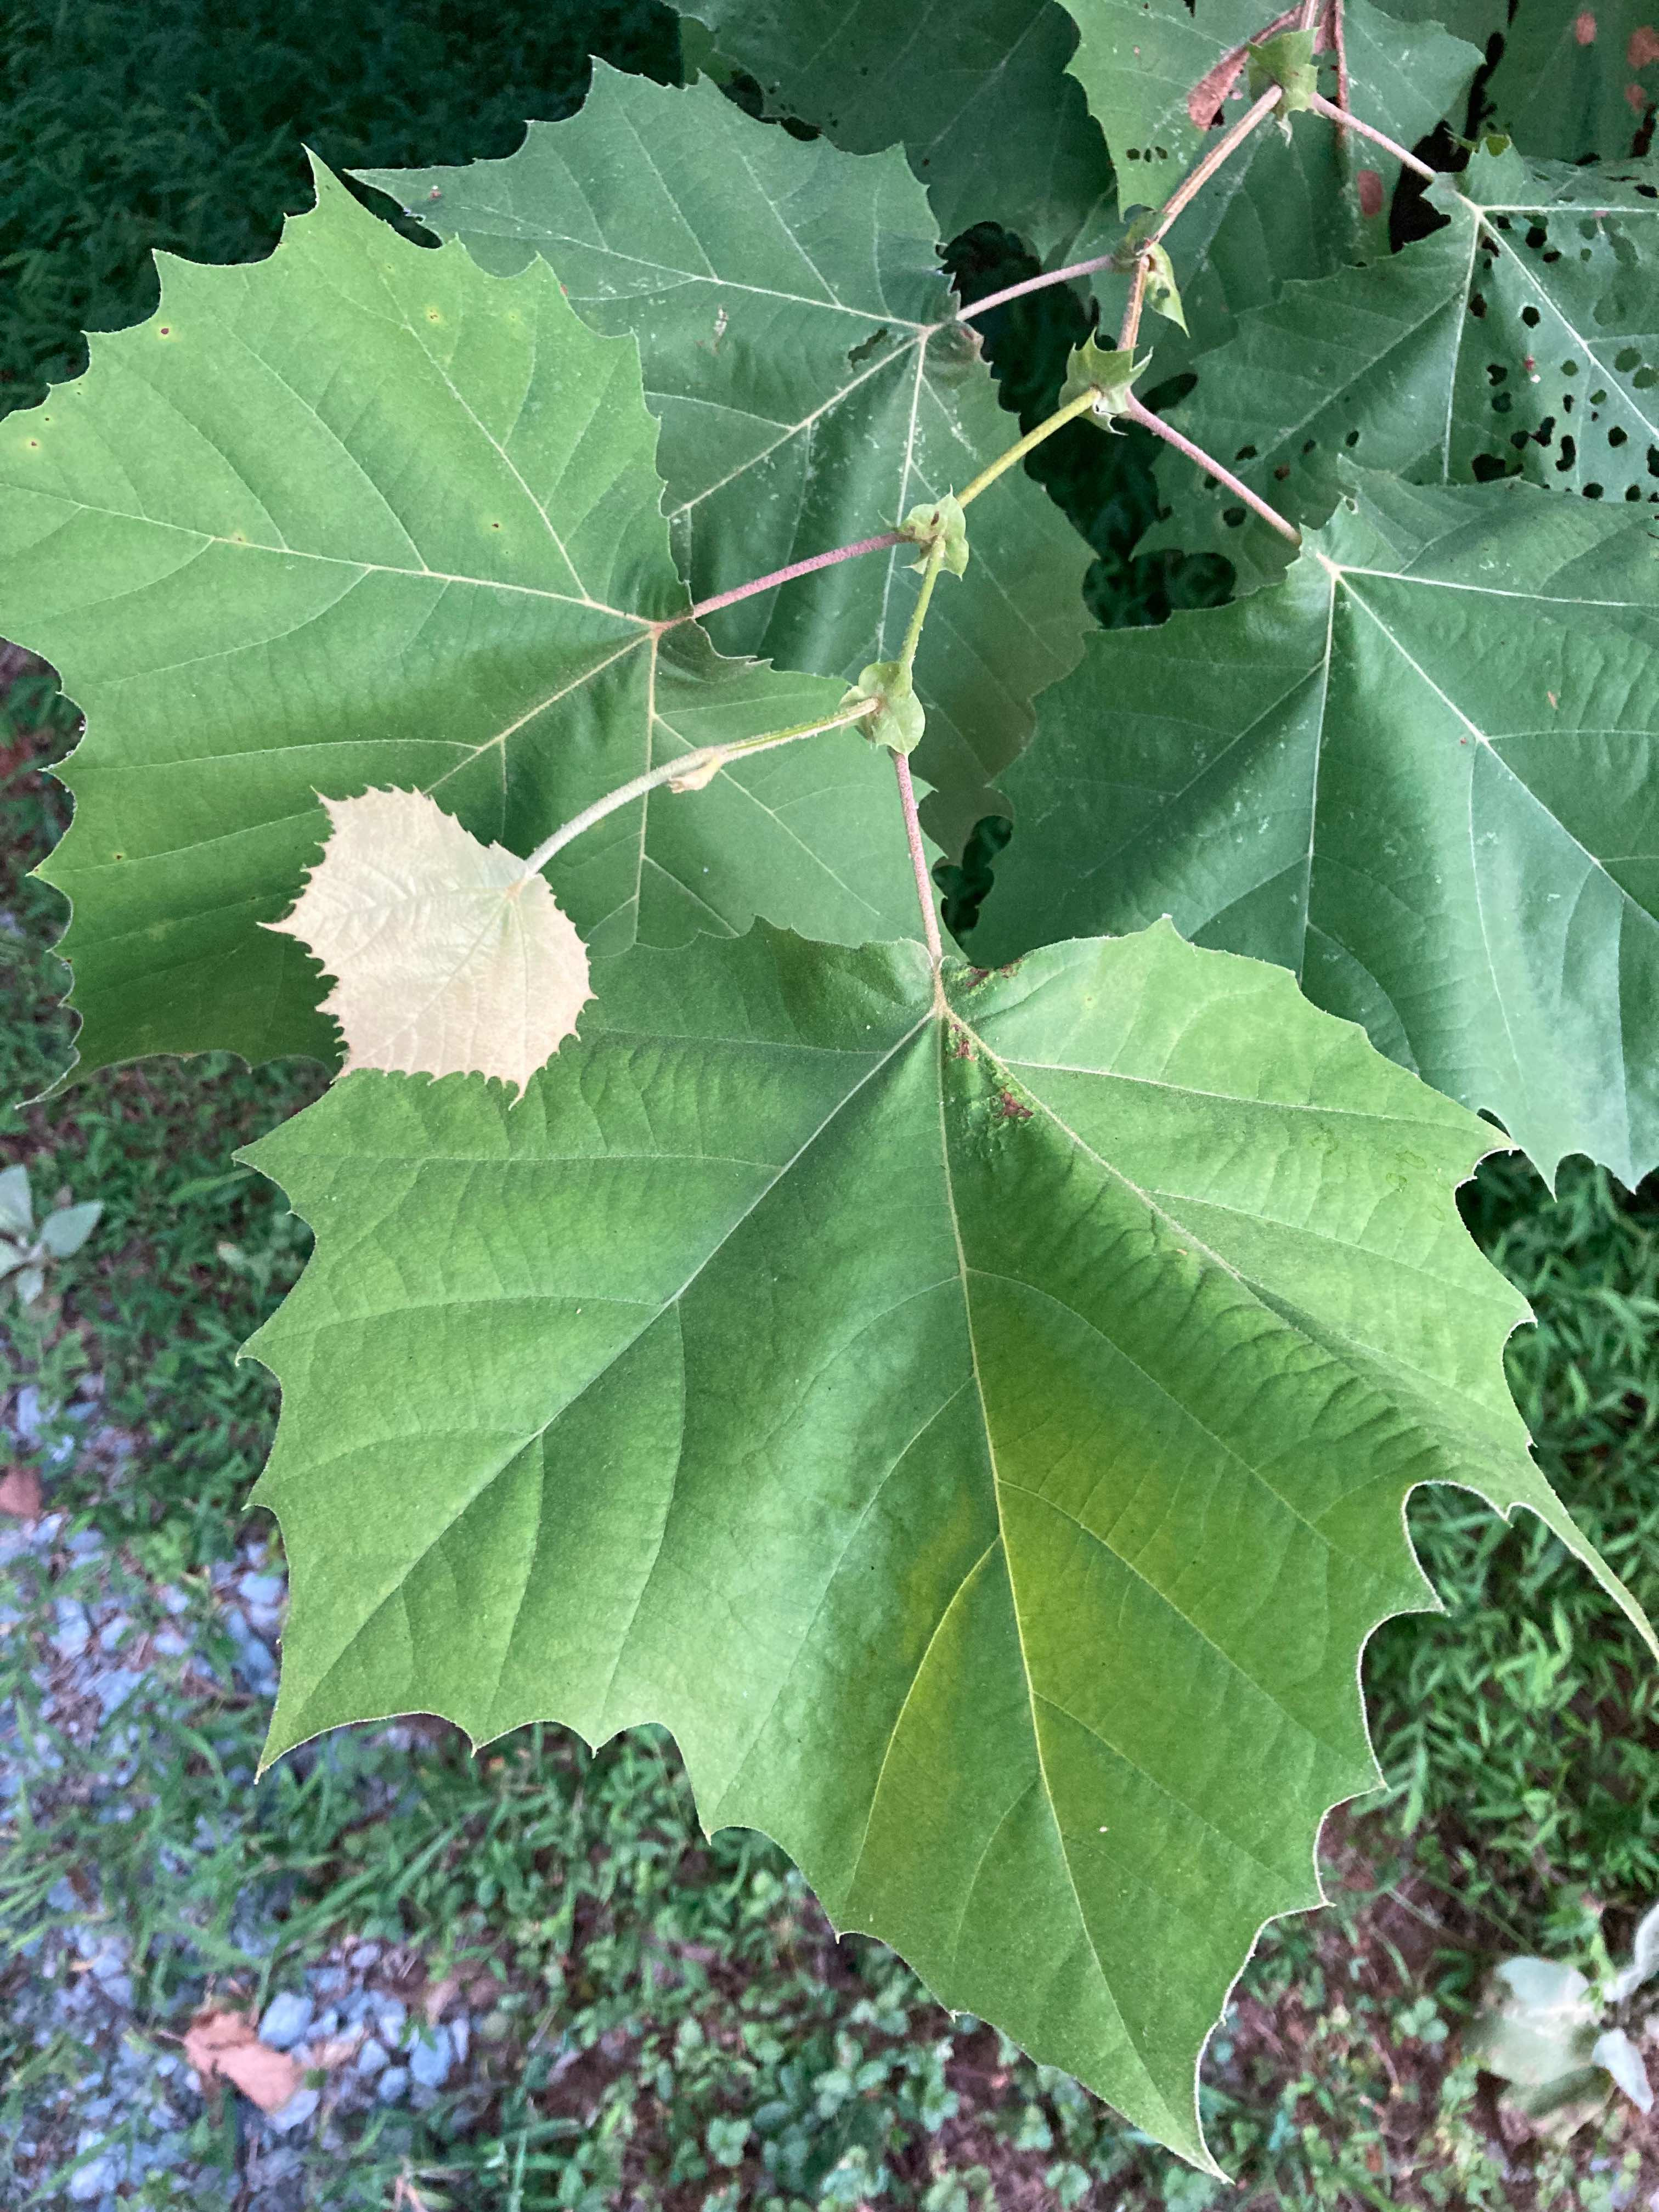 The Scientific Name is Platanus occidentalis. You will likely hear them called American Sycamore. This picture shows the Leaves are alternately arranged and have leafy stipules.  of Platanus occidentalis